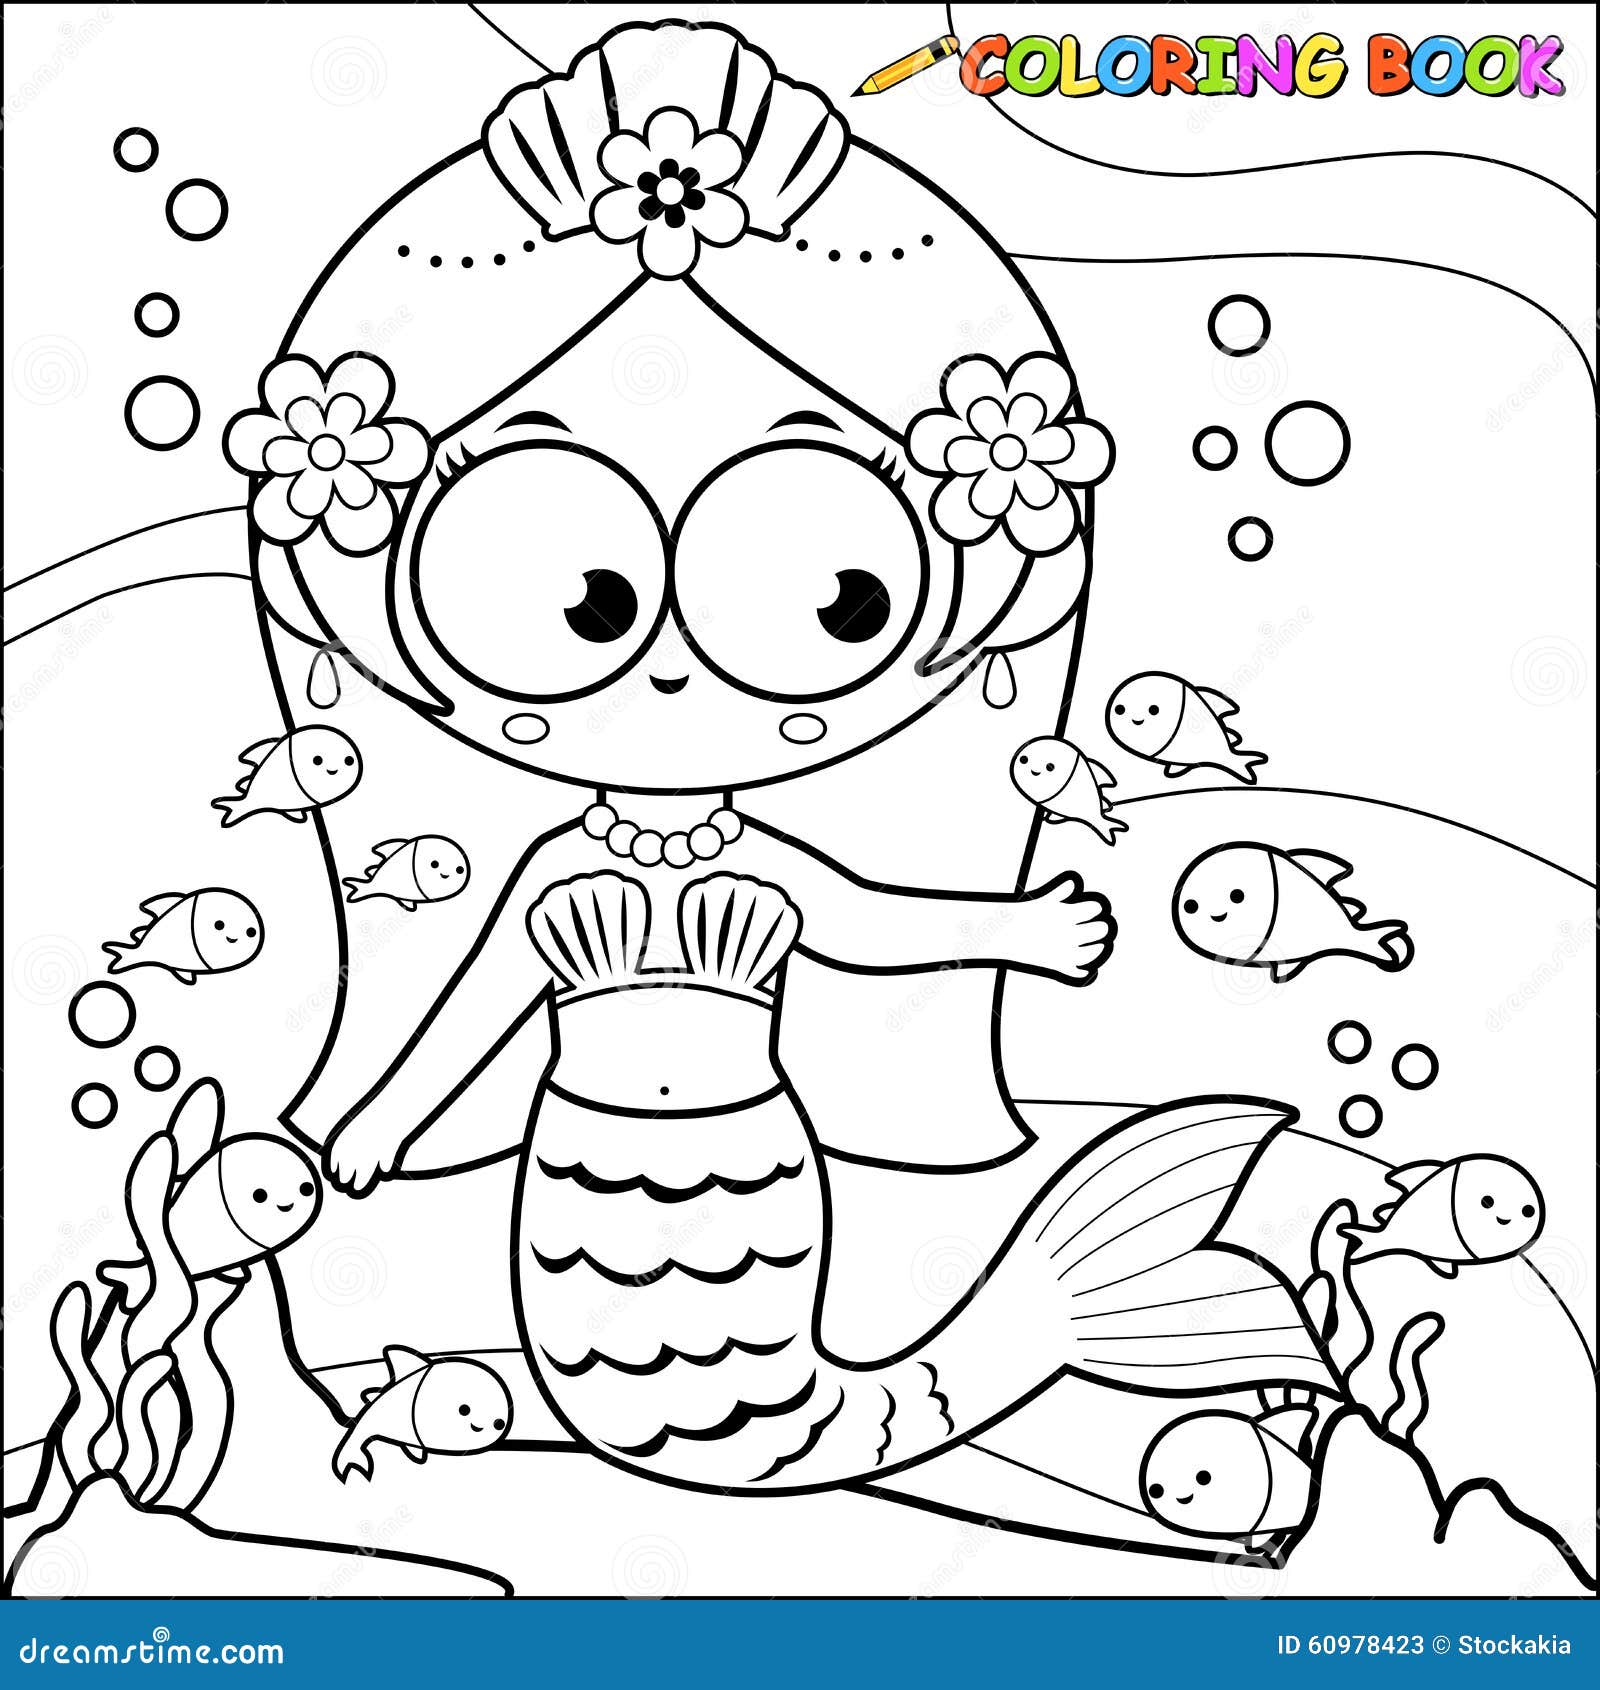 Coloring page mermaid swimming in the sea